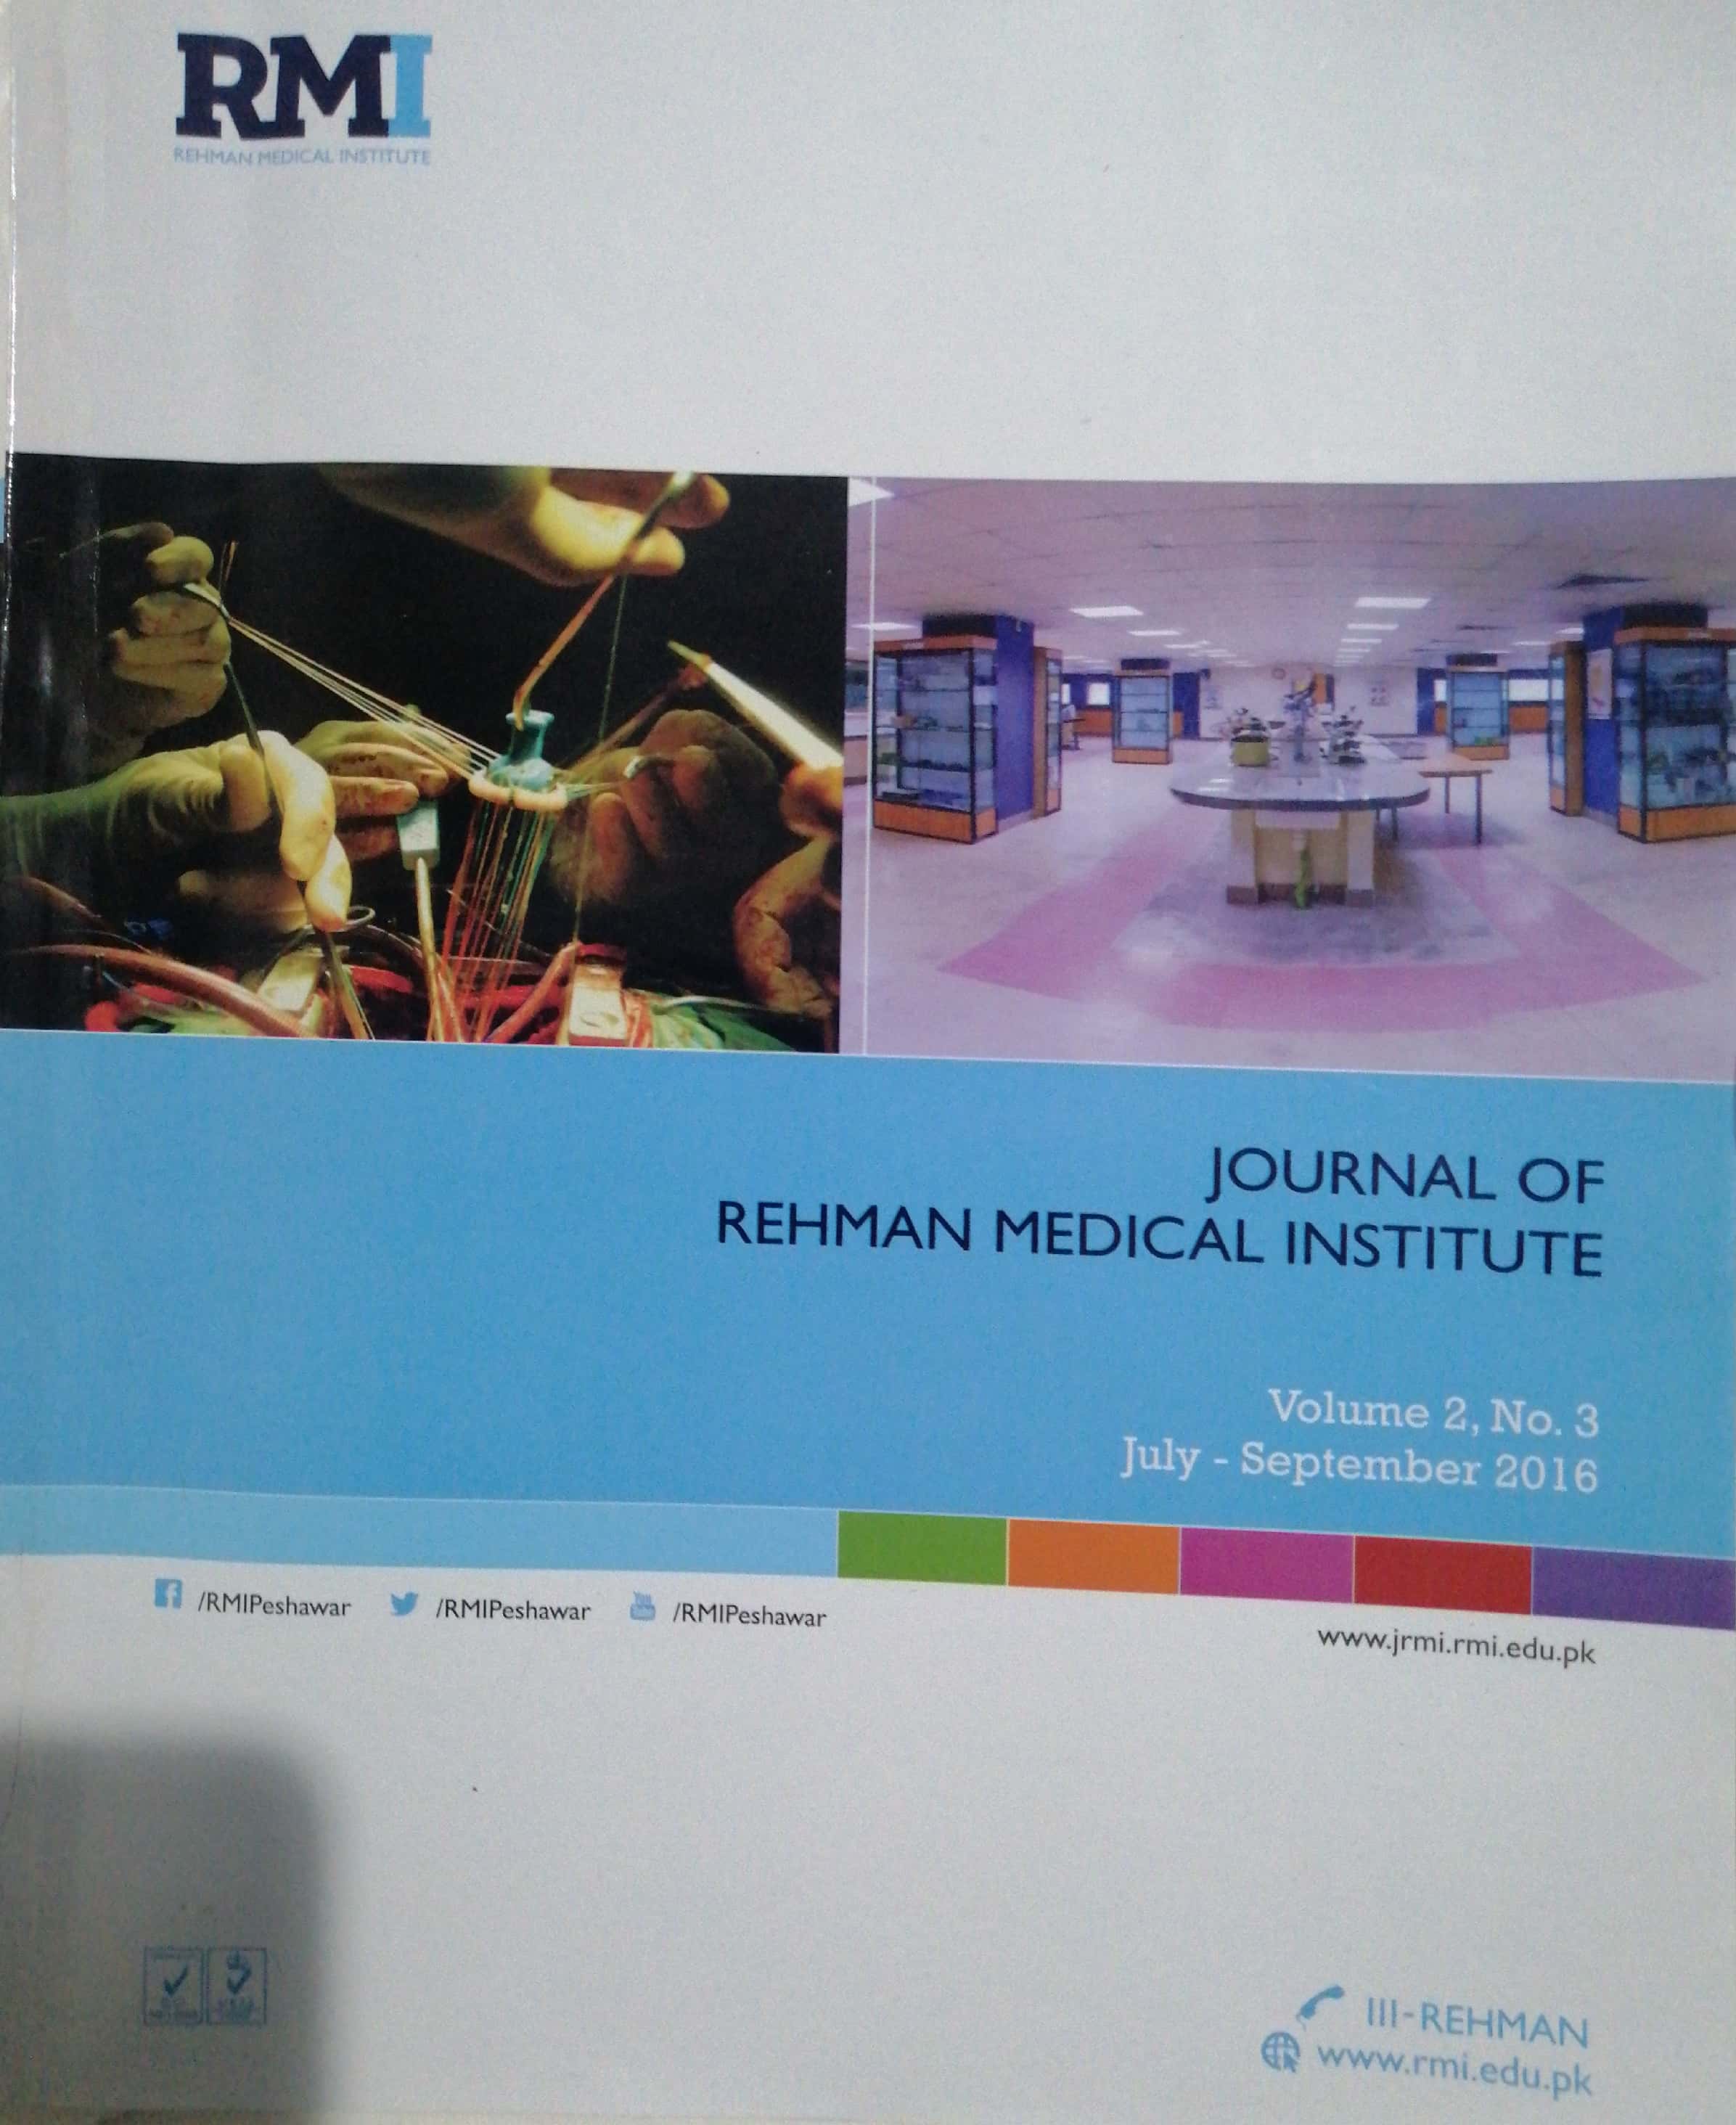 					View Vol. 2 No. 3 (2016): Journal of Rehman Medical Institute
				